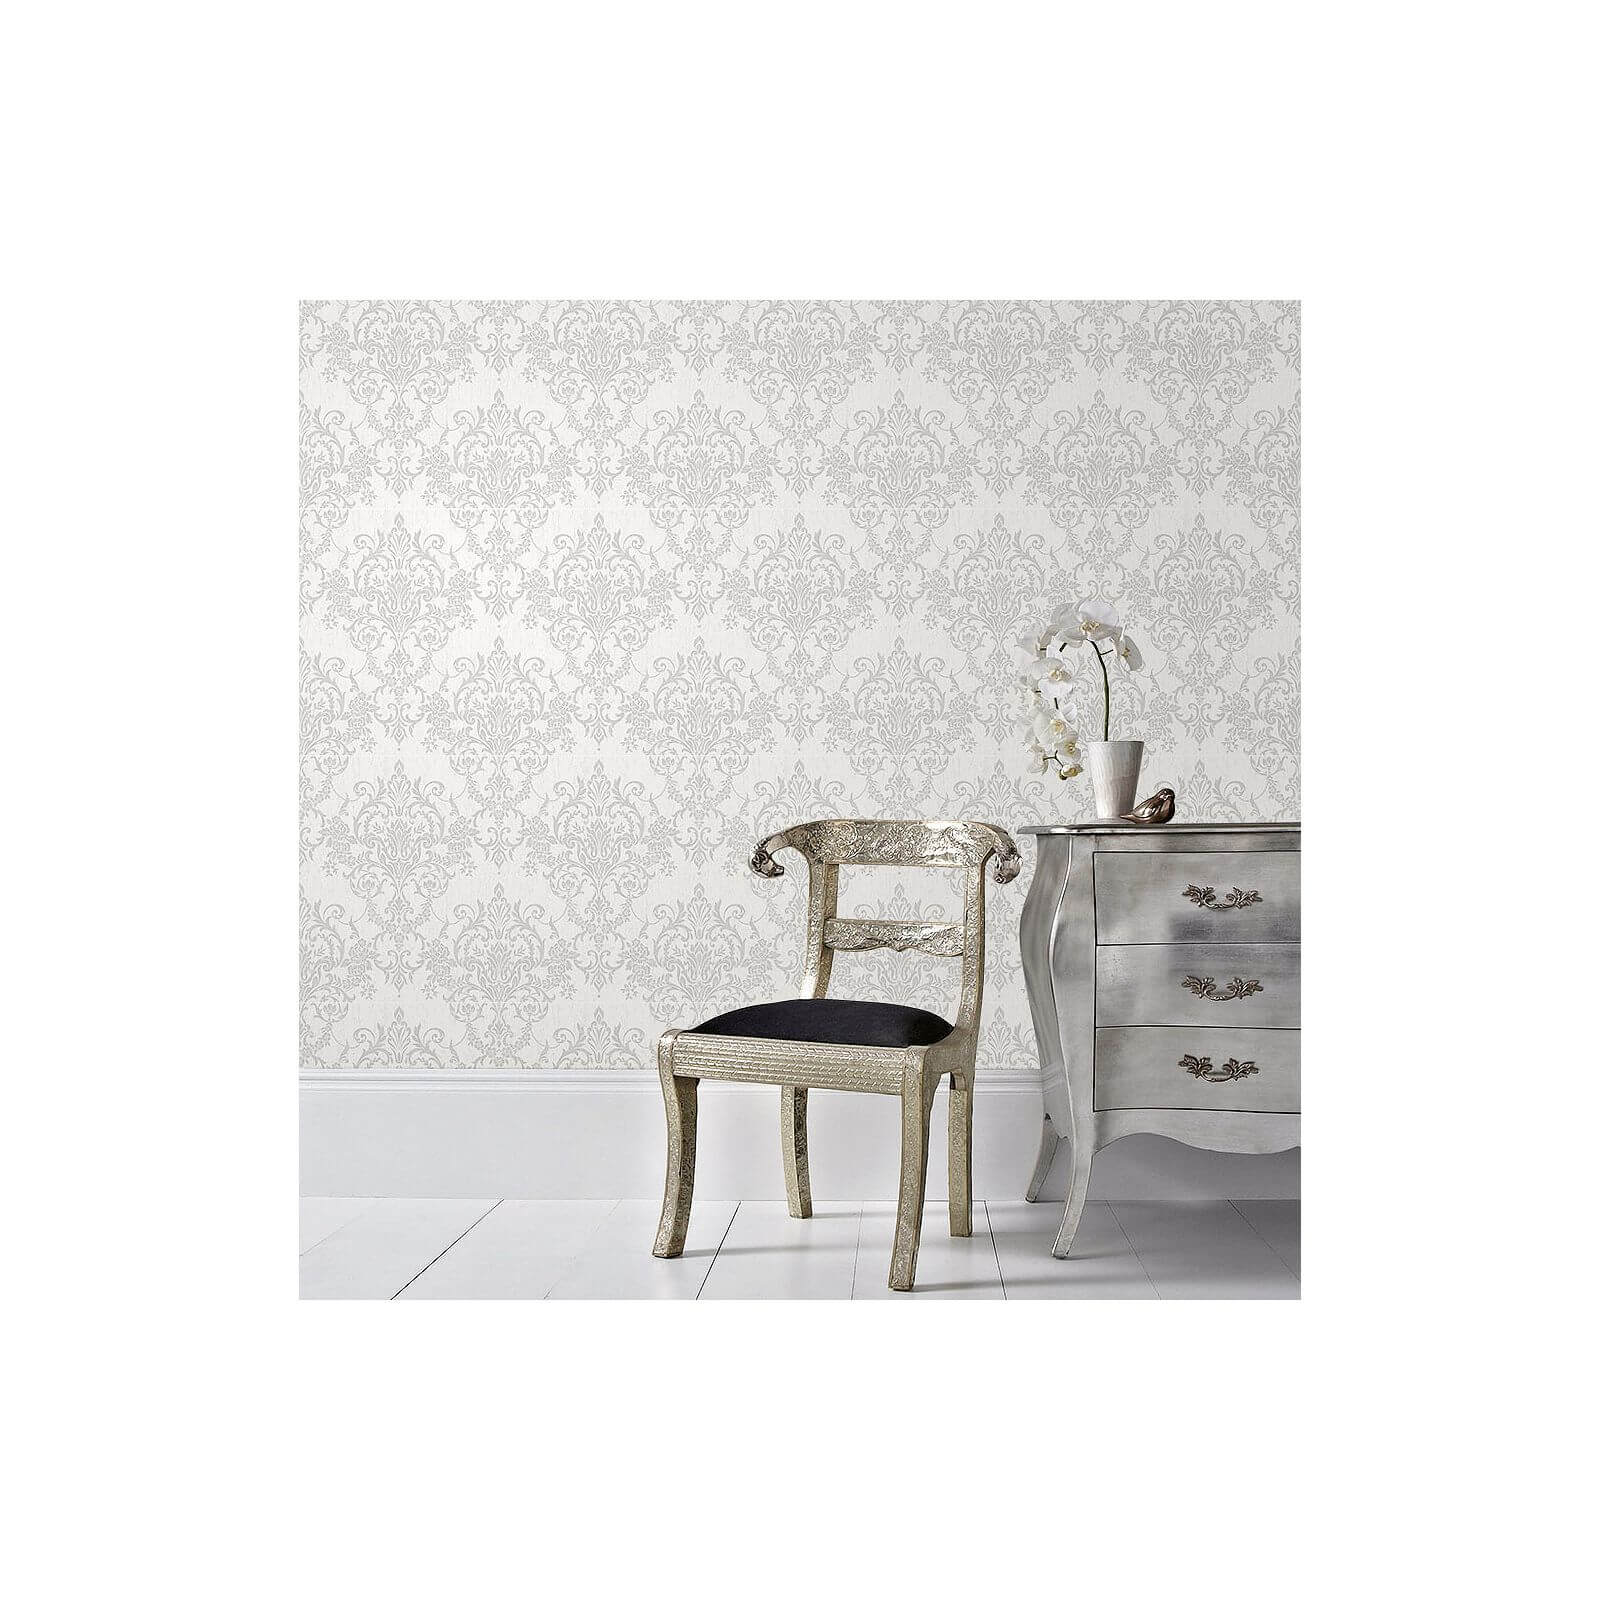 Superfresco Easy Paste the Wall Victorian Damask Wallpaper - Silver